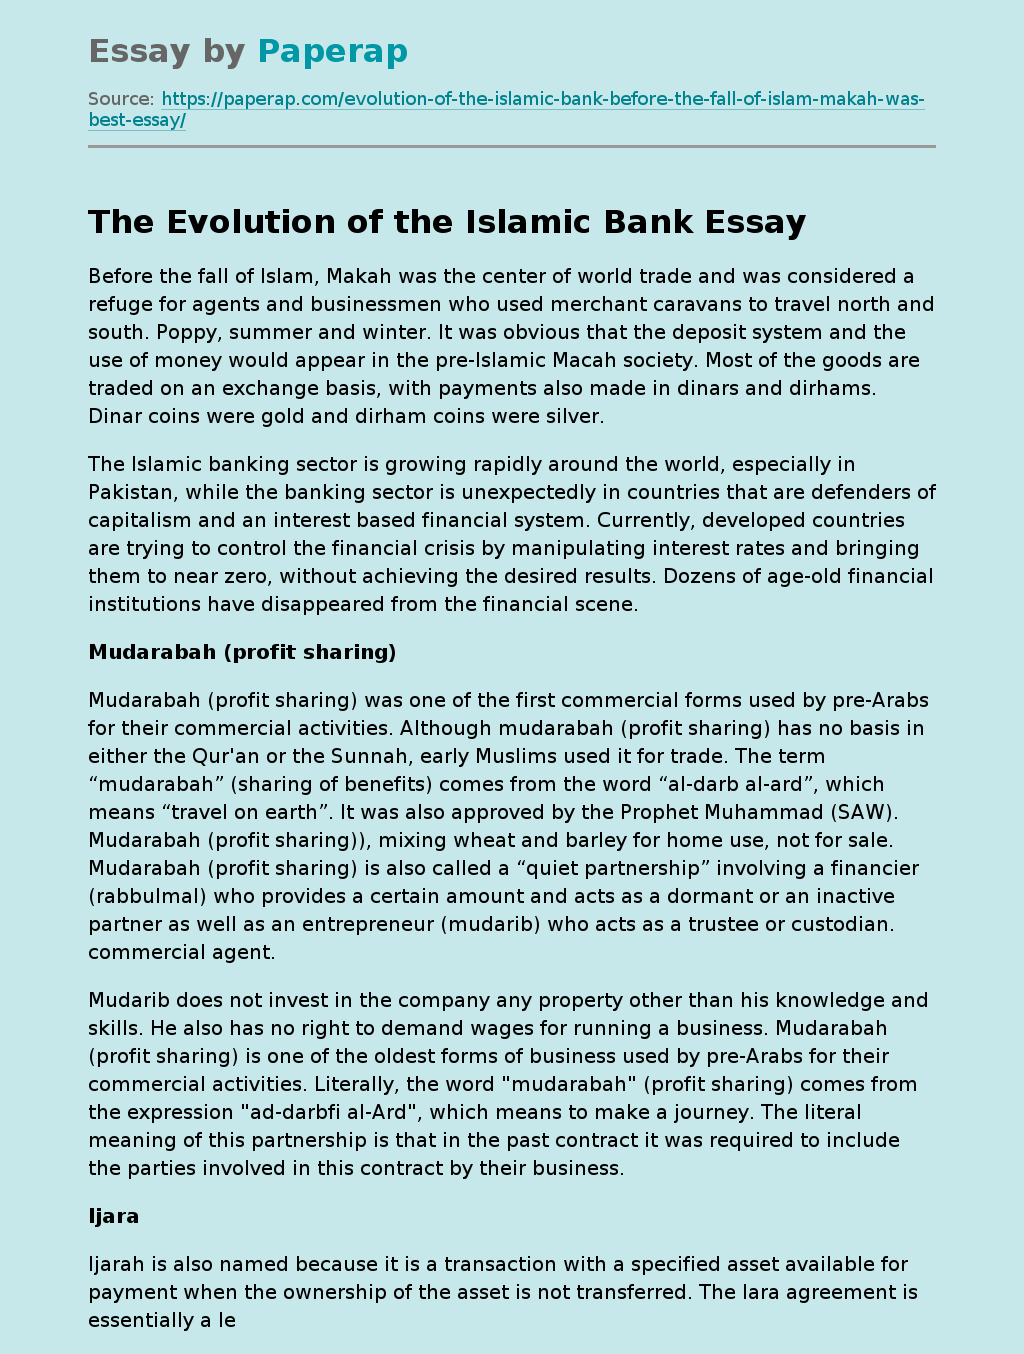 The Evolution of the Islamic Bank